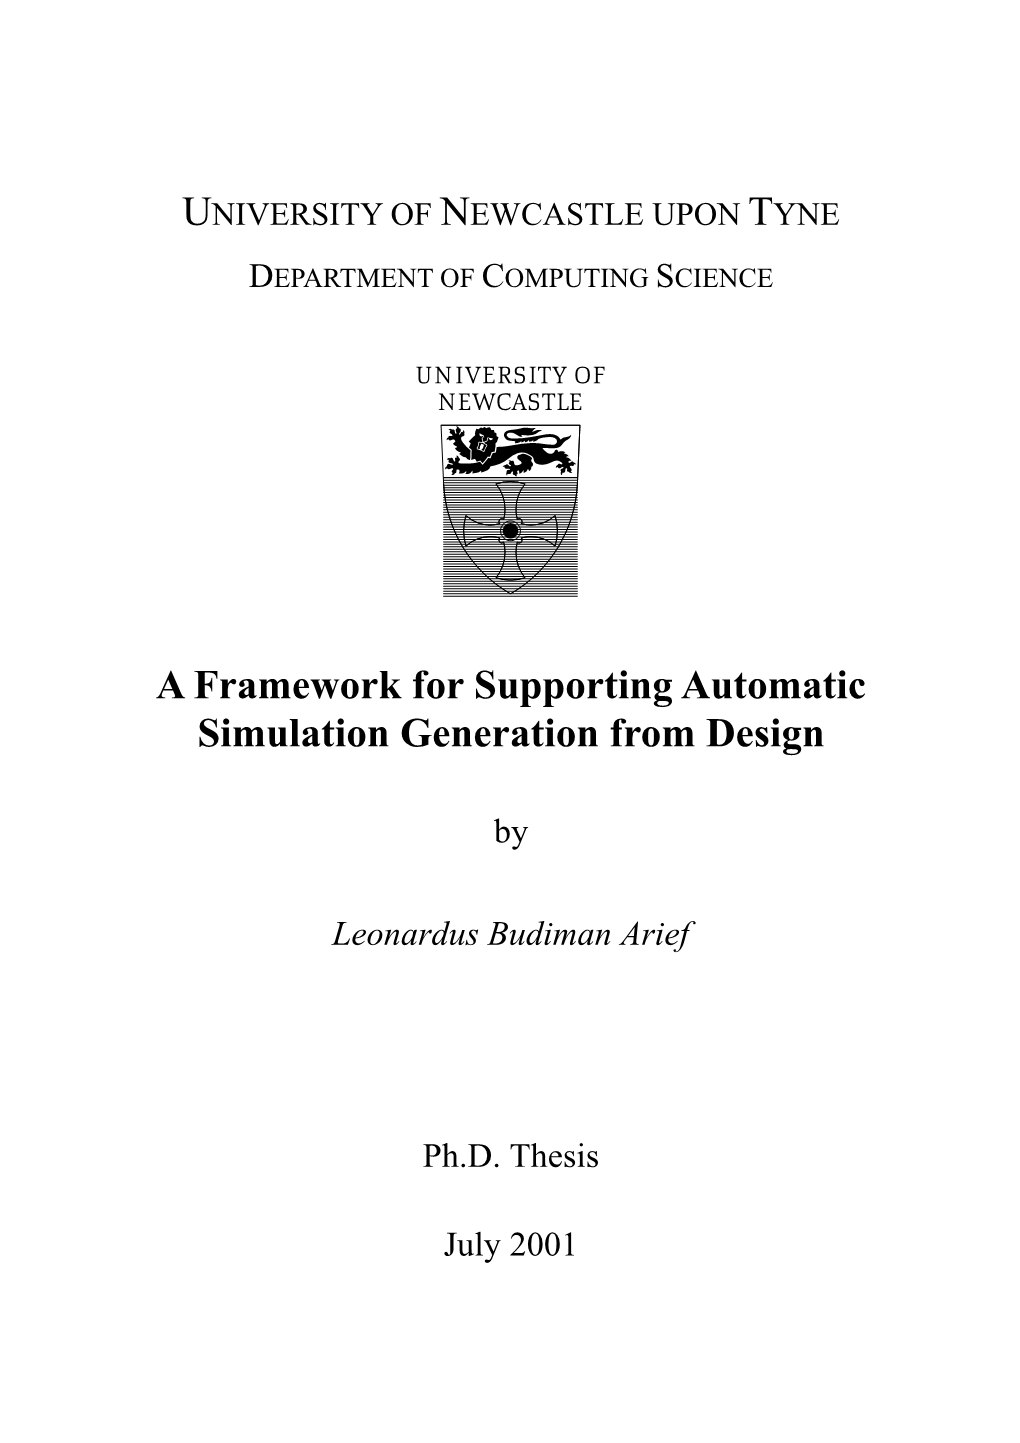 A Framework for Supporting Automatic Simulation Generation from Design